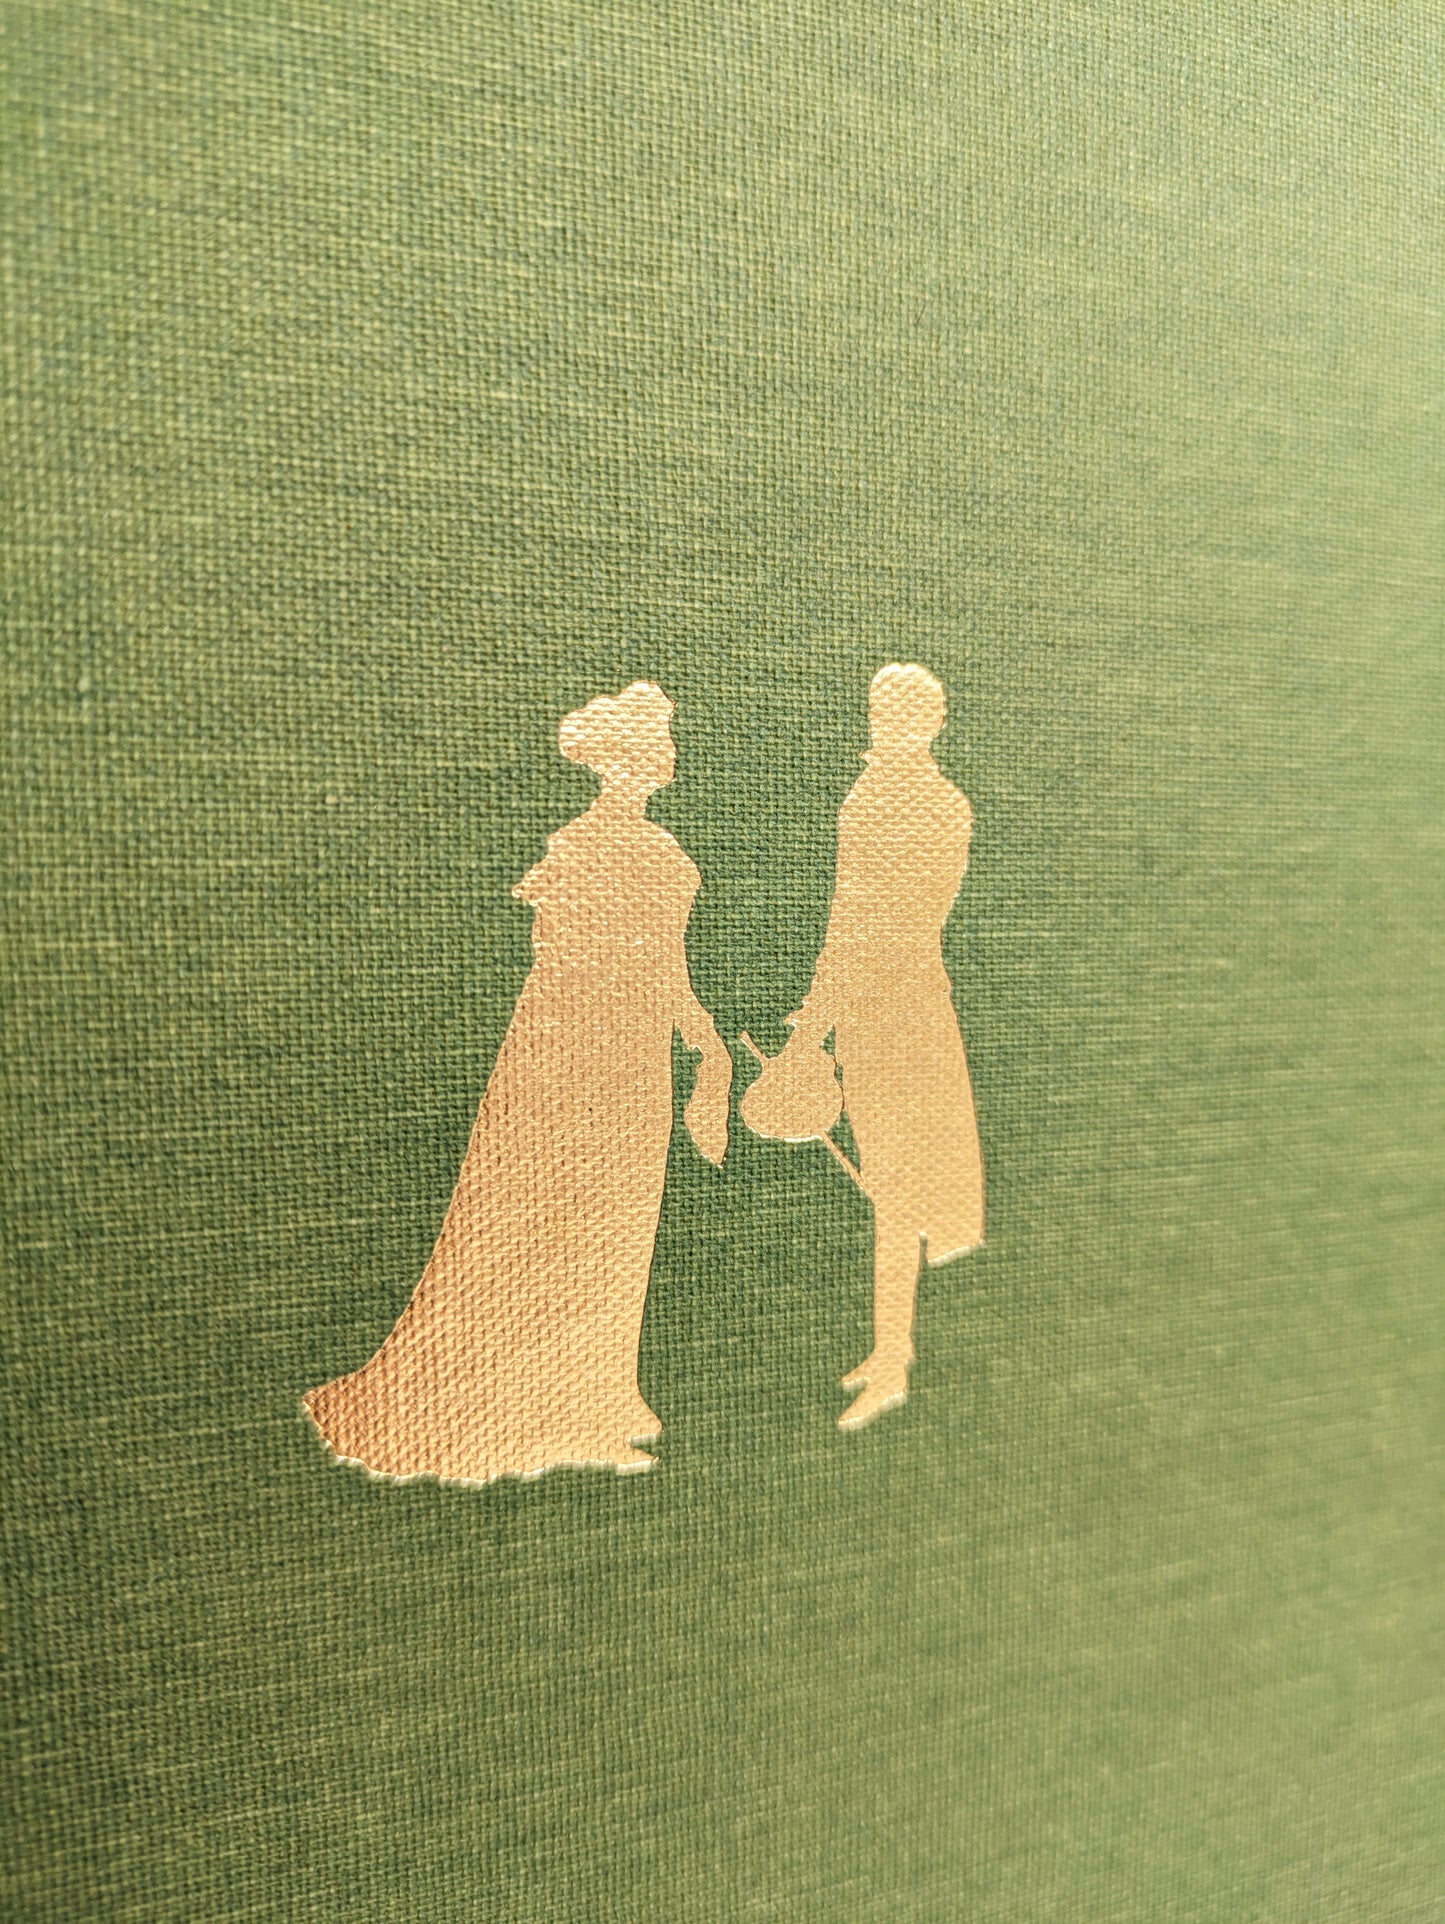 Pride and Prejudice by Jane Austen - Deluxe Edition